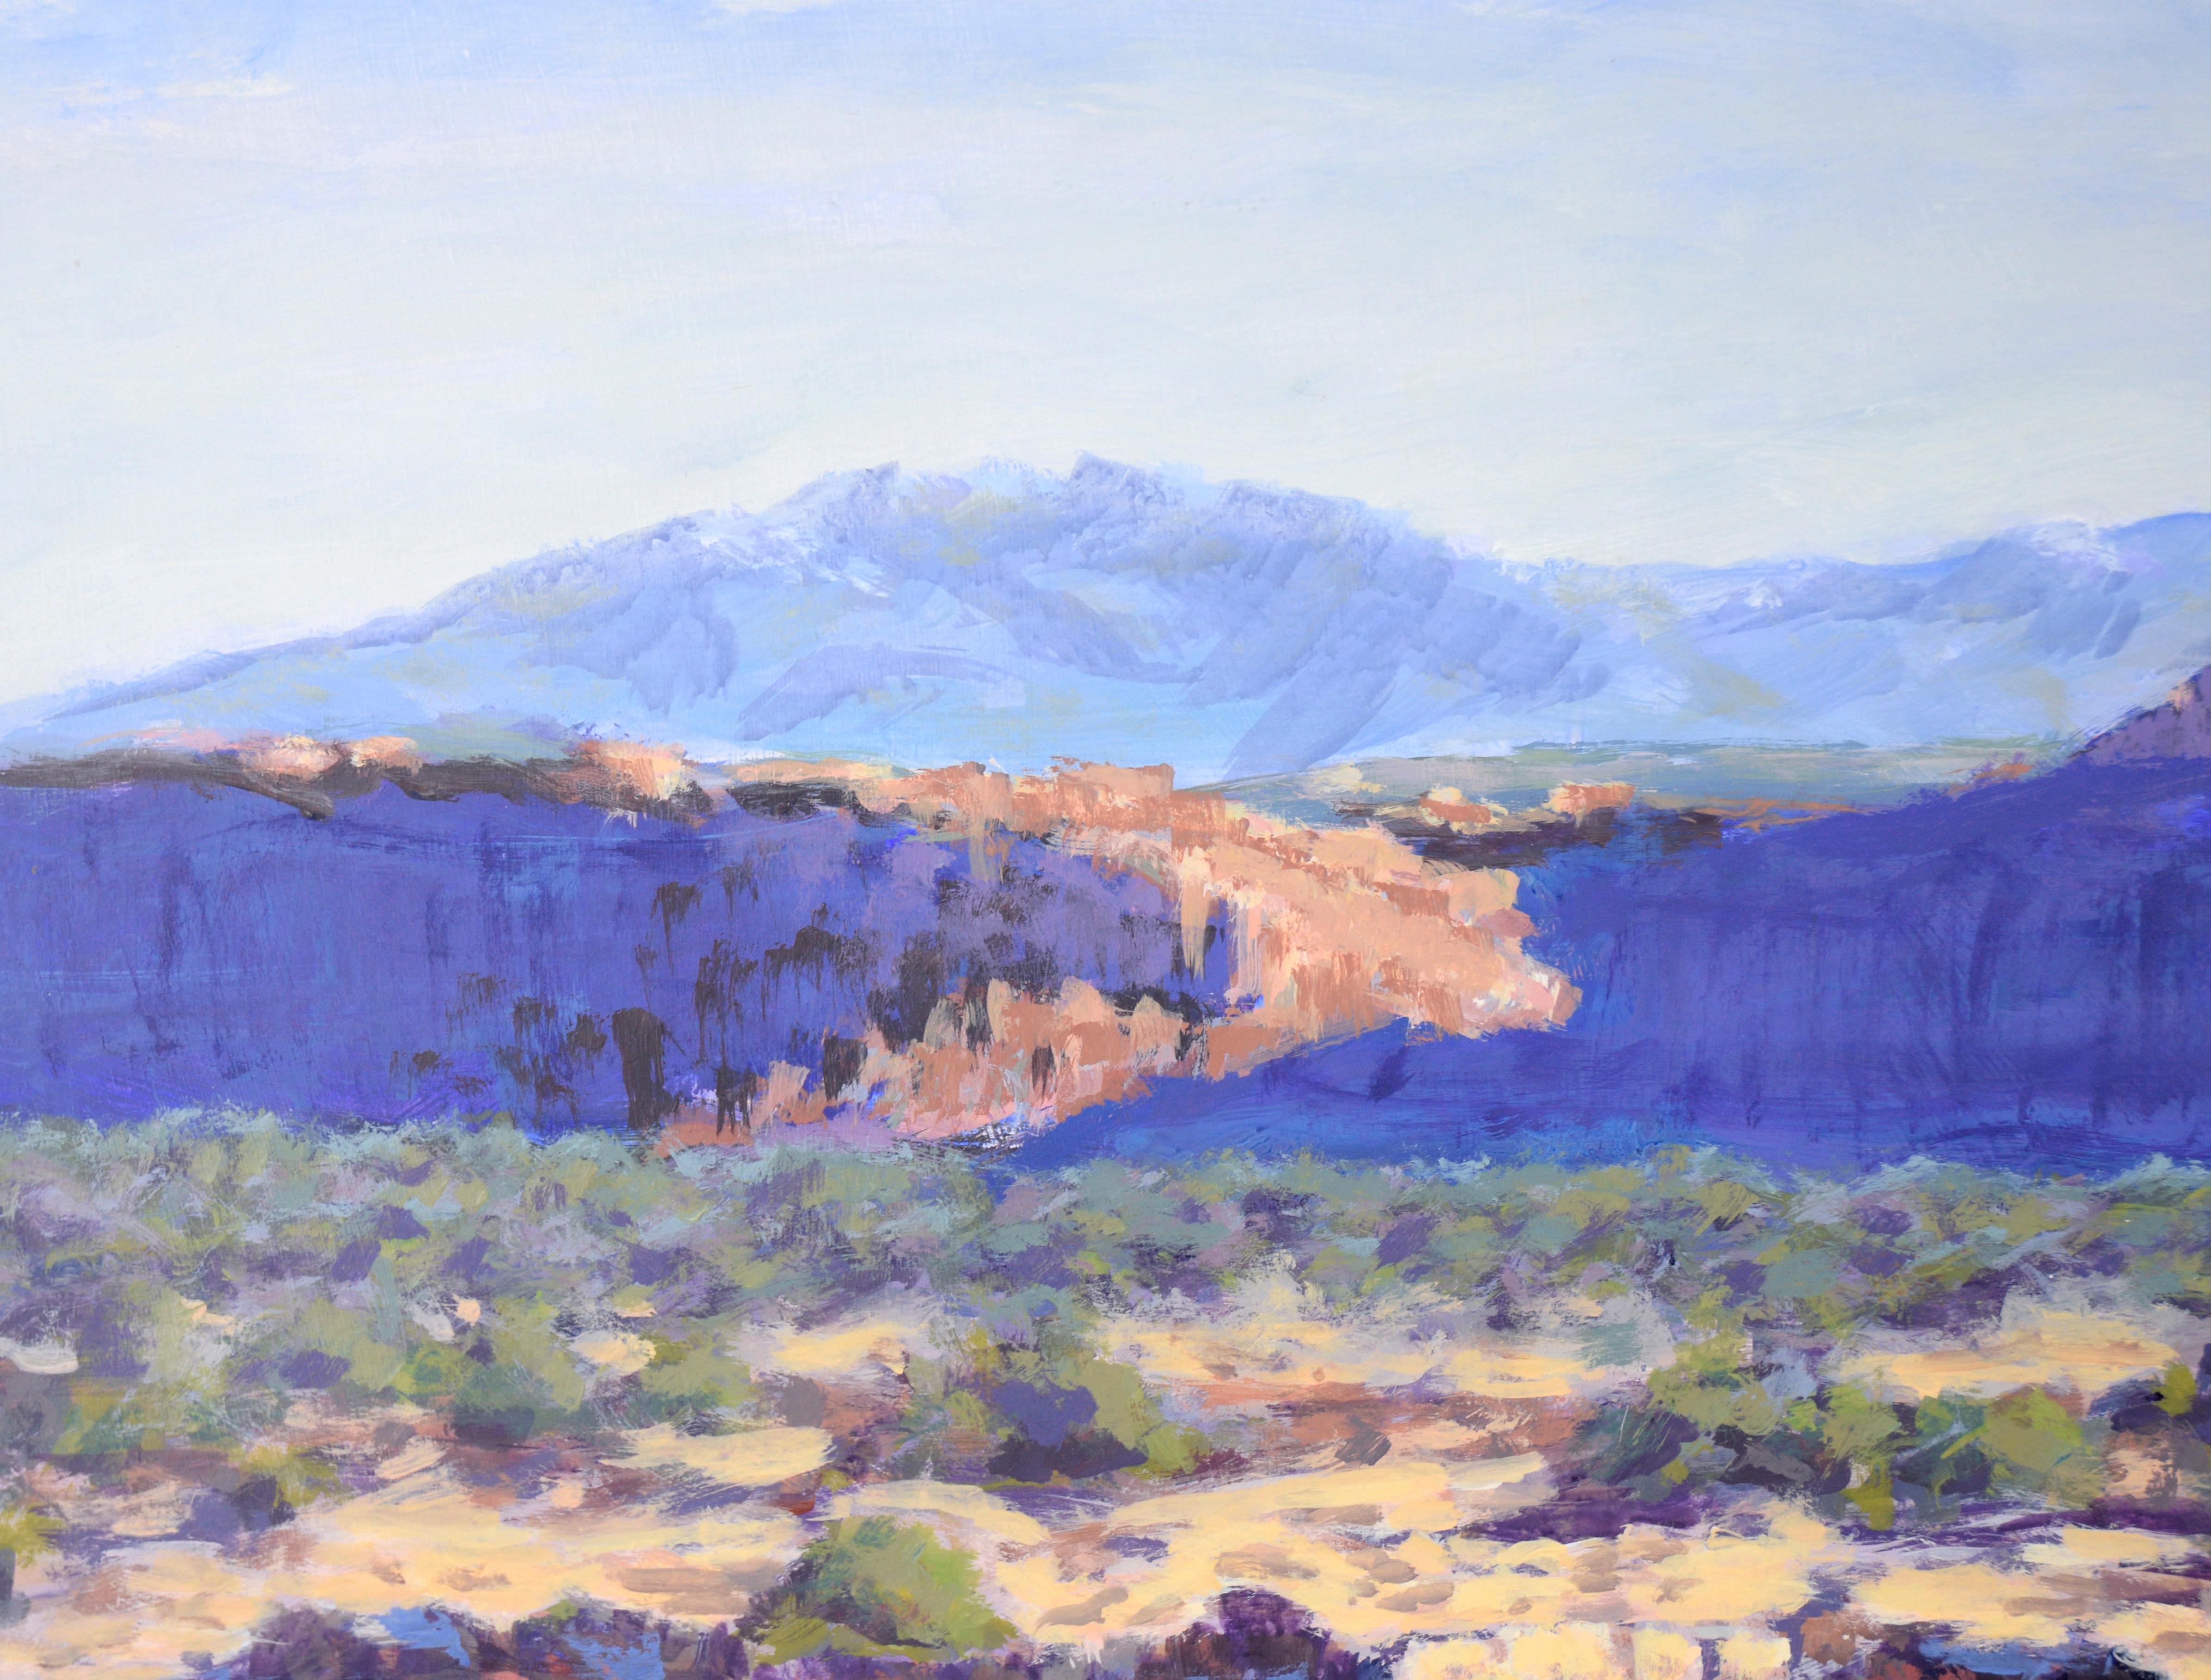 Canyonland - Western Plein Aire Landscape Acrylic on Board - American Impressionist Painting by Nick White